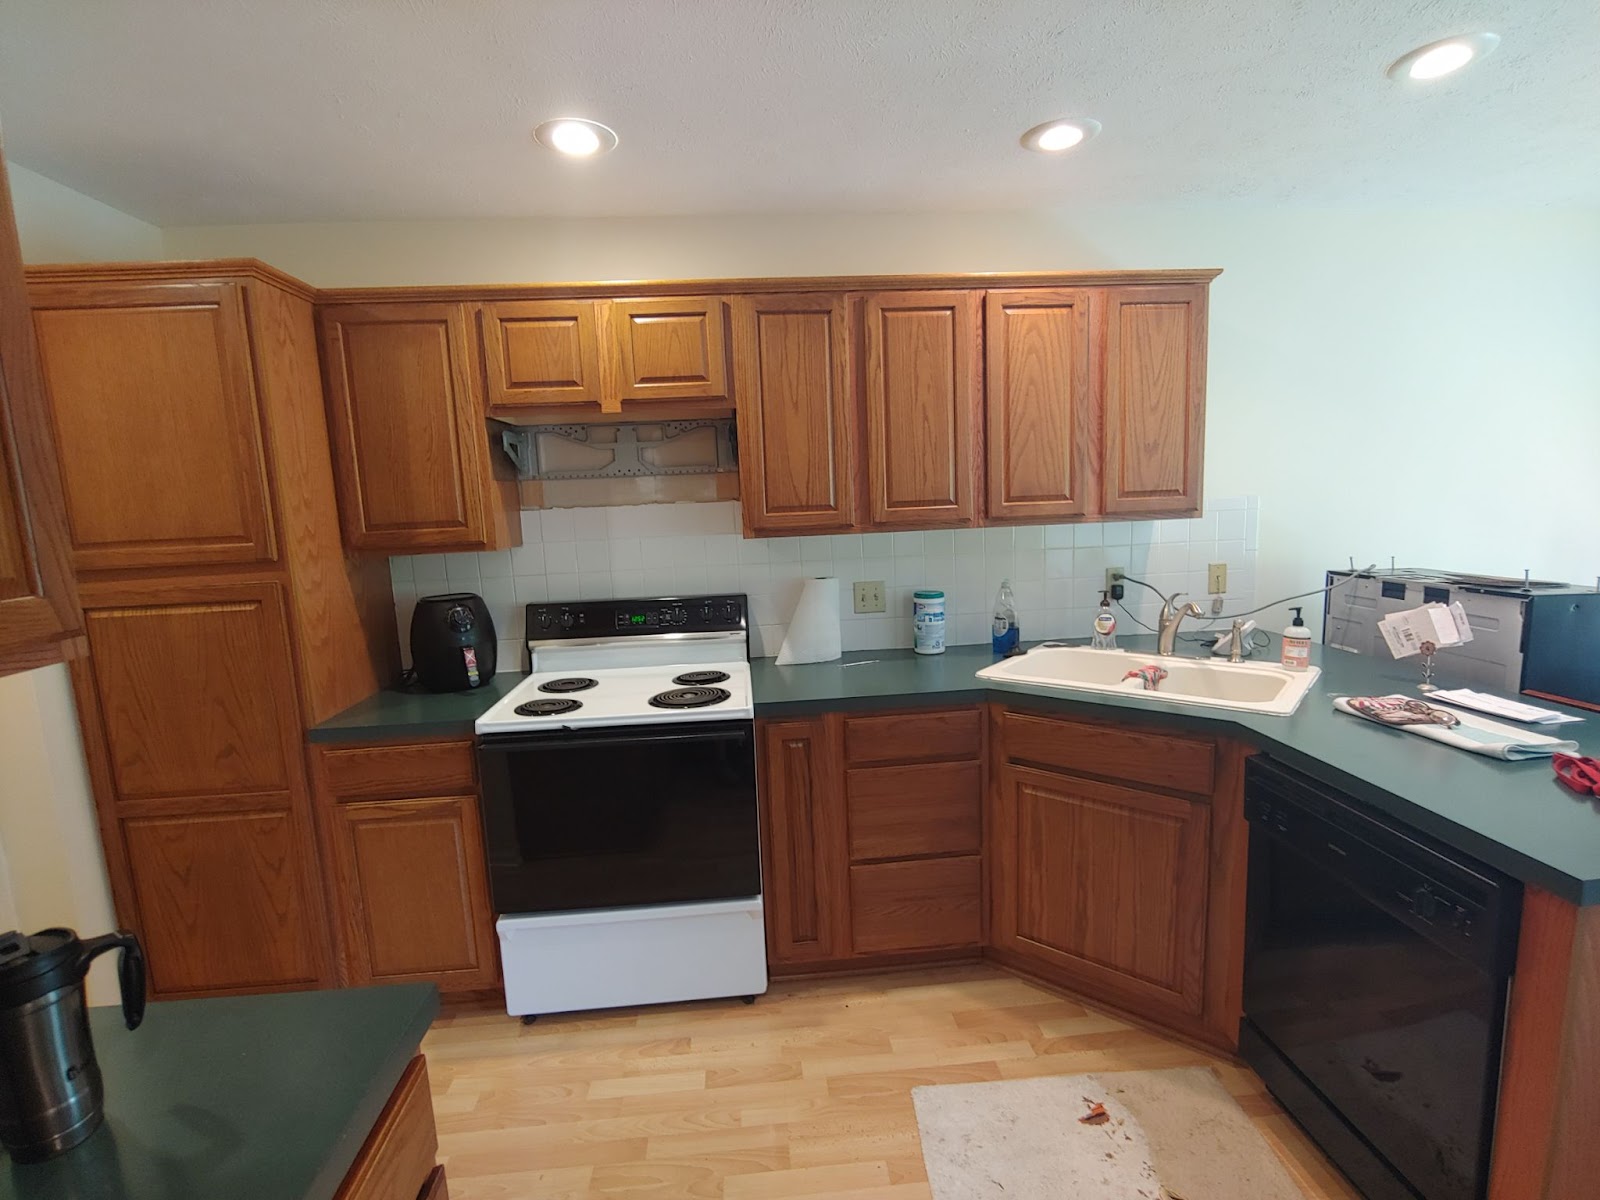 Stained kitchen cabinets with green countertops, a stove, and a dishwasher